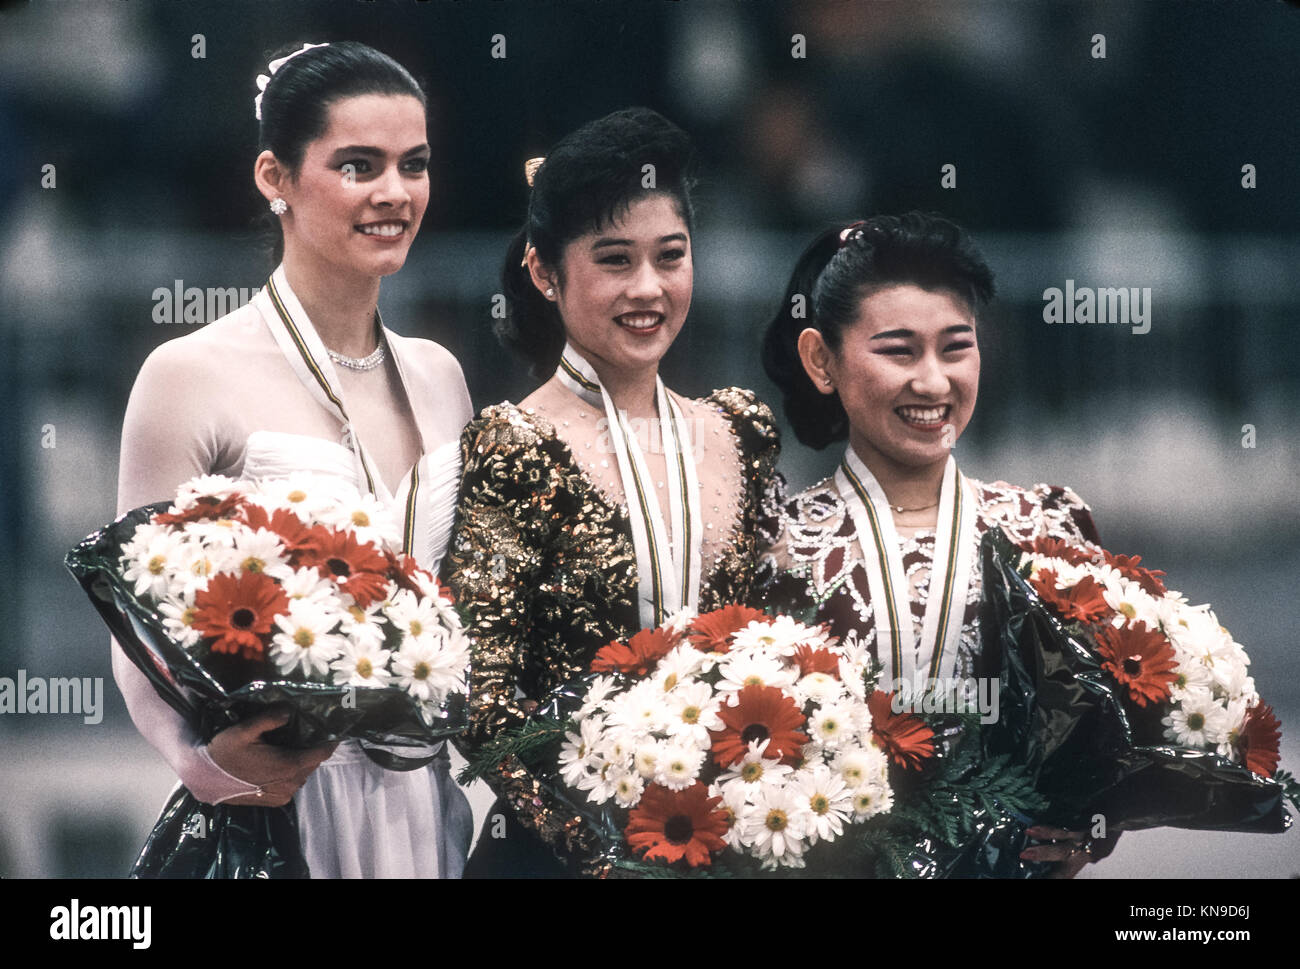 Kristi Yamaguchi (USA) Olympic Champion with silver medalist Nancy Kerrigan and bronze medalist Midori Ito at the 1992 Olympic Winter Games. Stock Photo